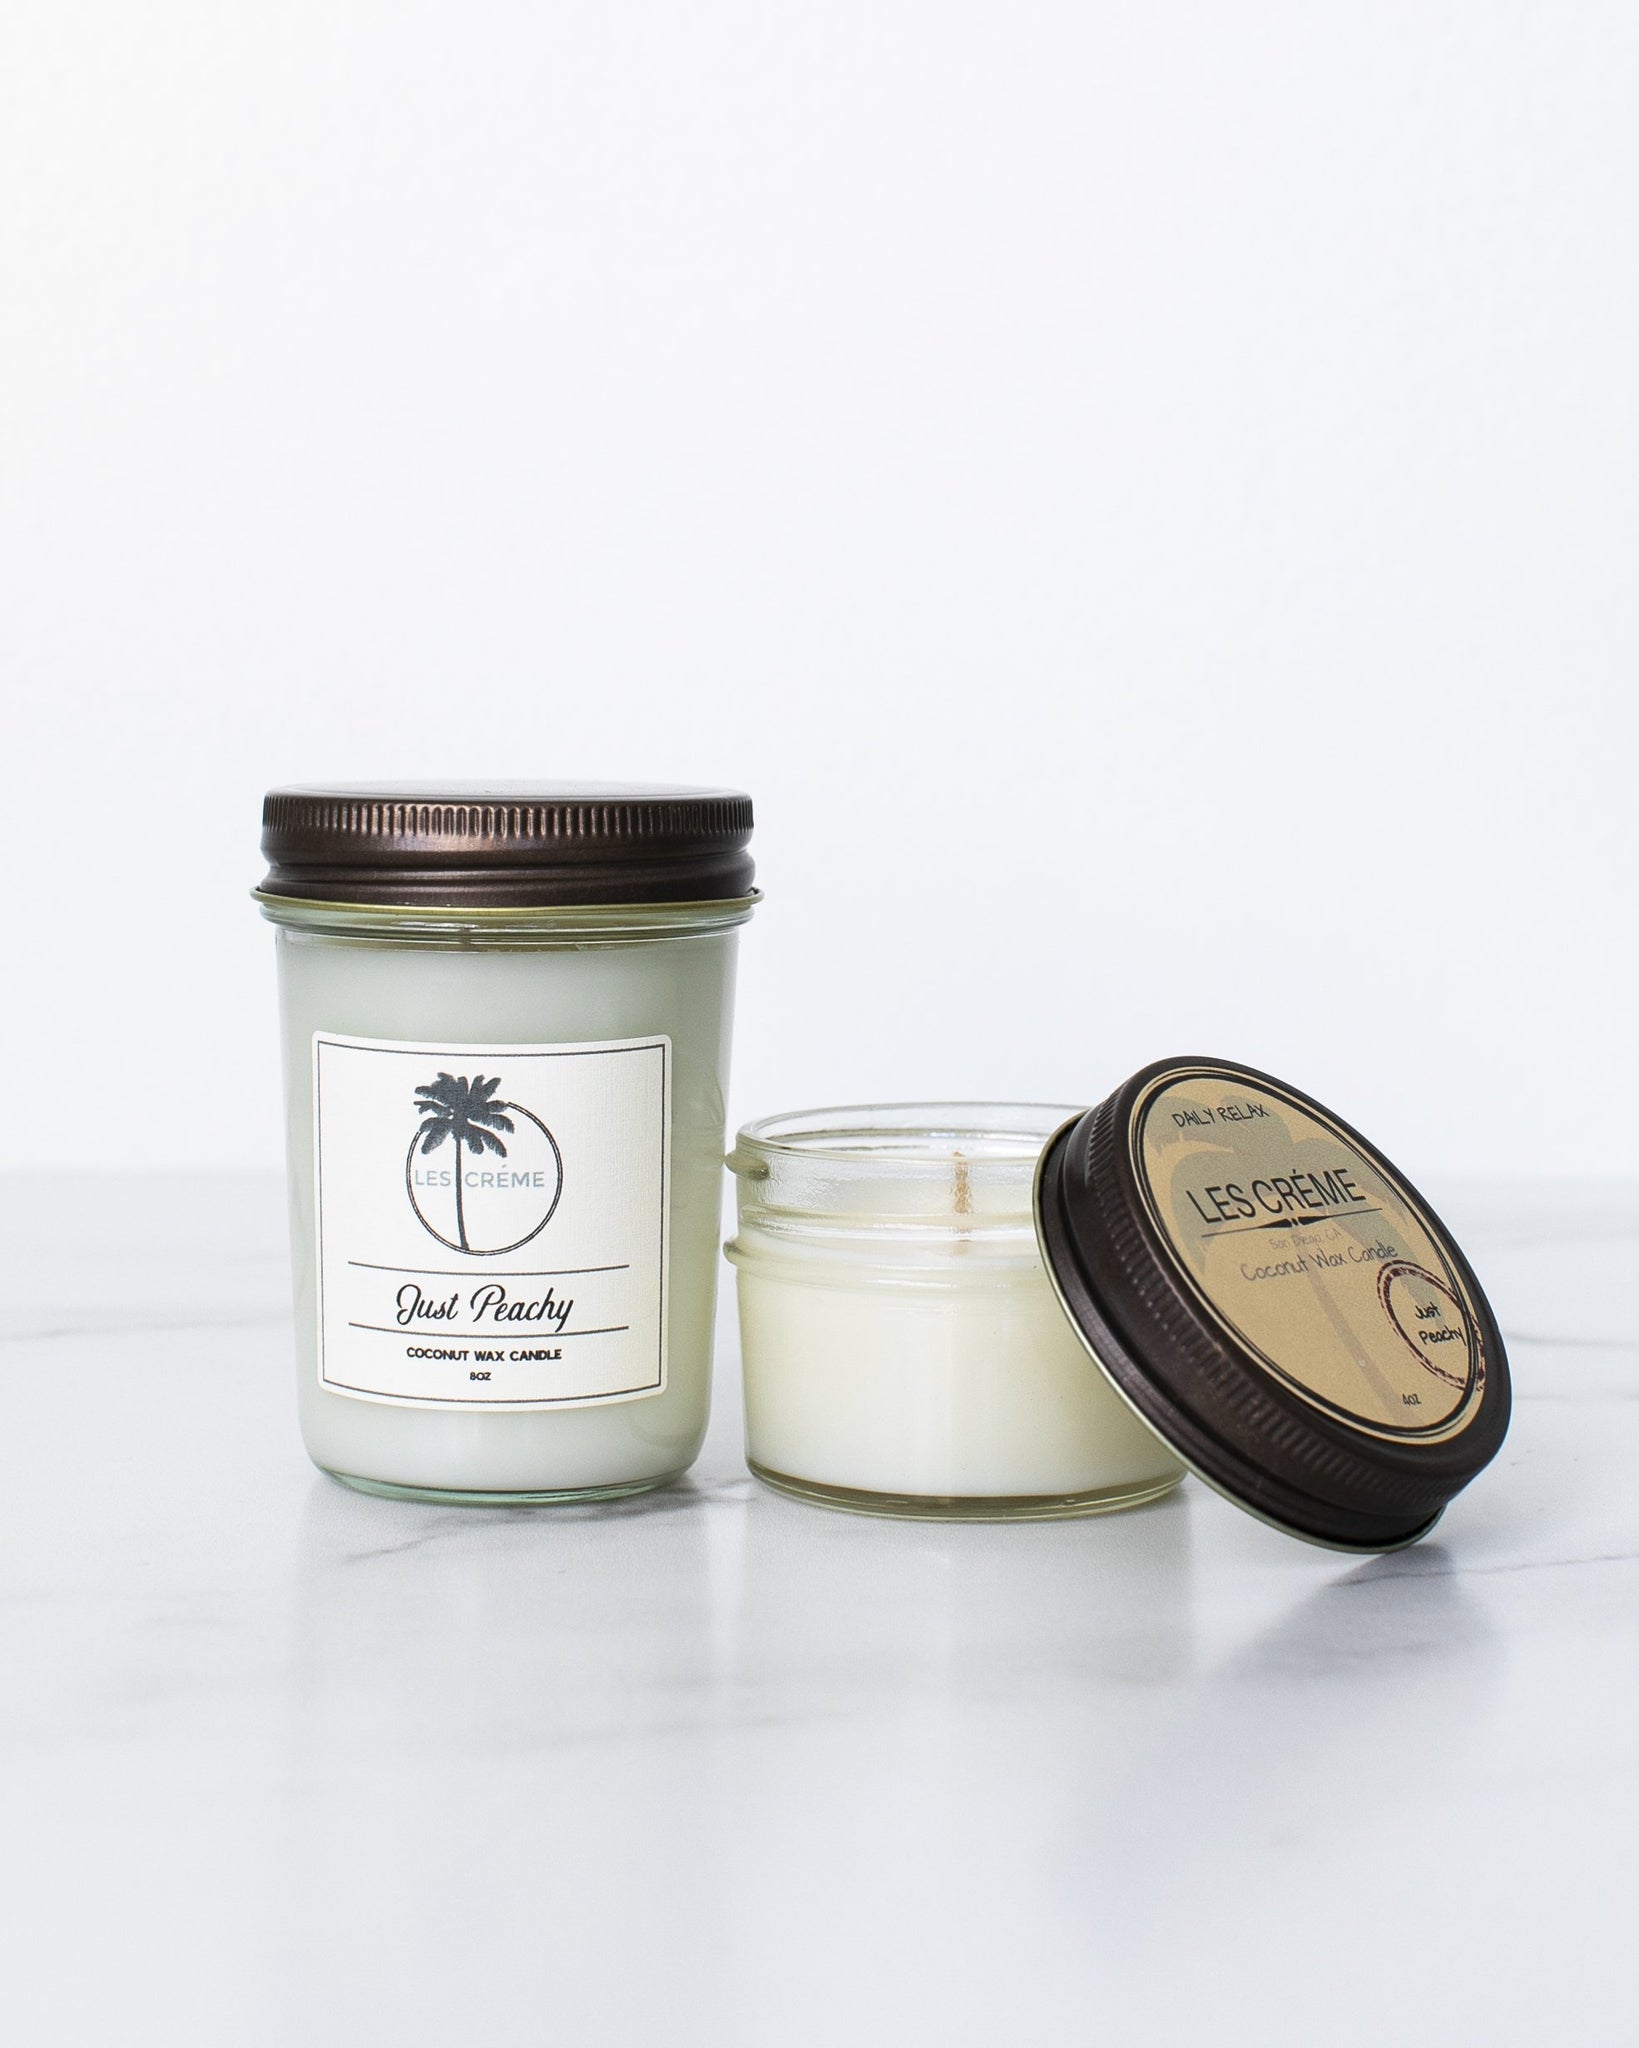 Just Peachy Scent Coconut Wax Candle